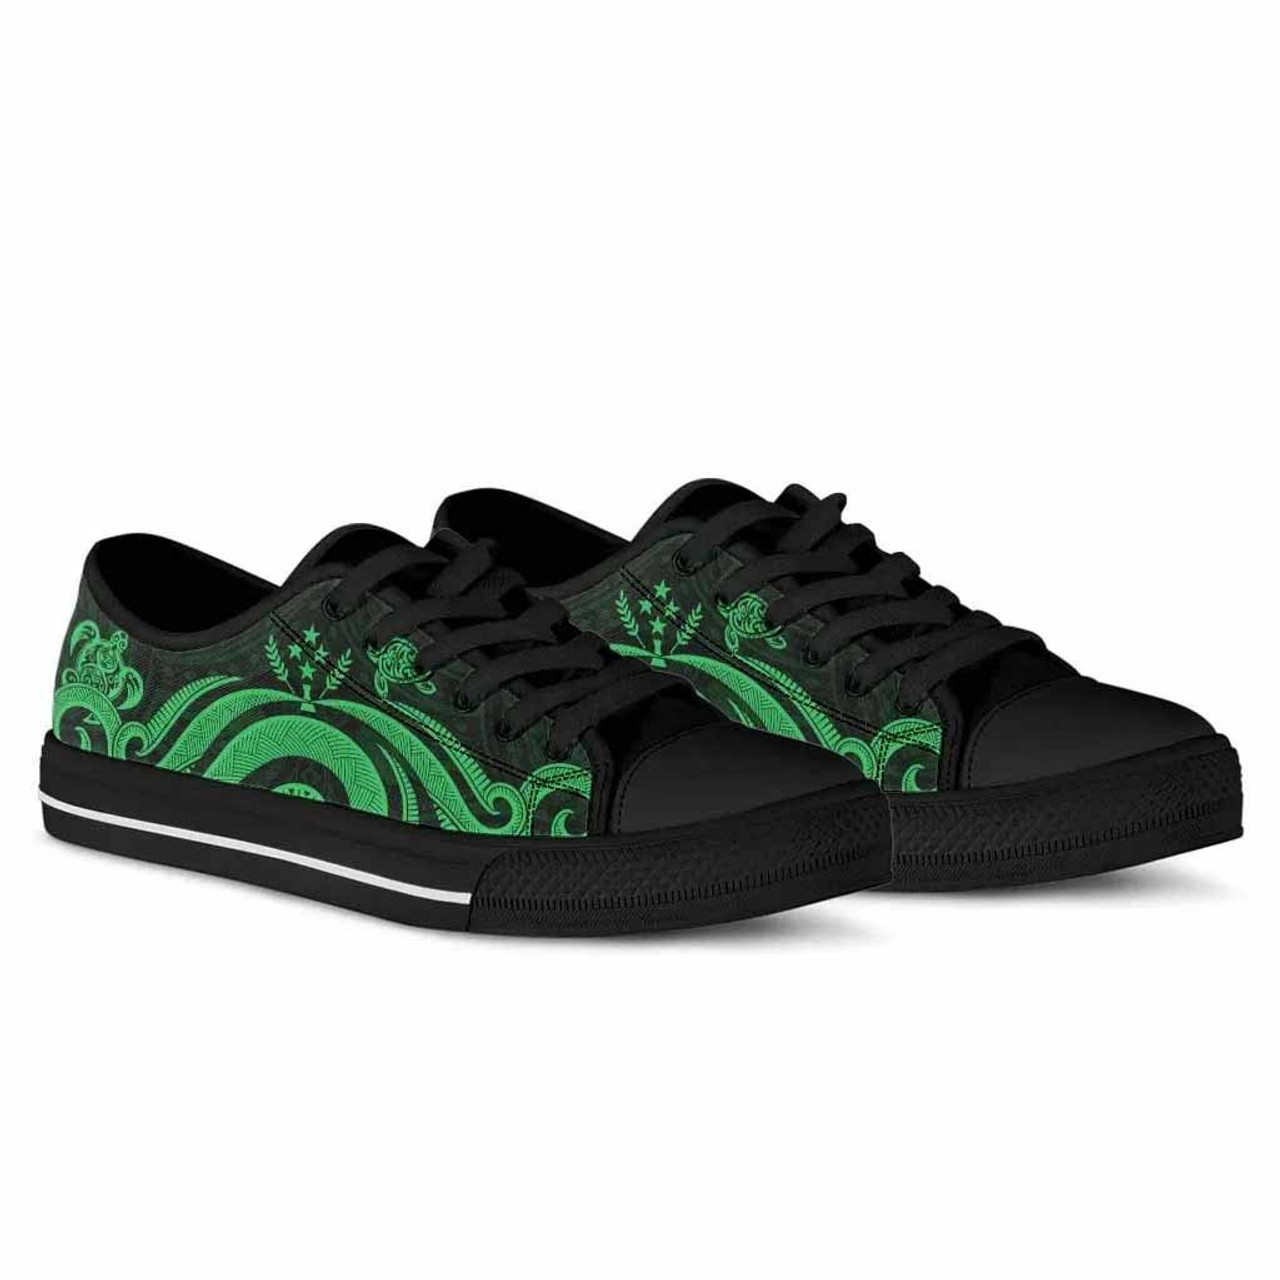 Kosrae Low Top Canvas Shoes - Green Tentacle Turtle 3